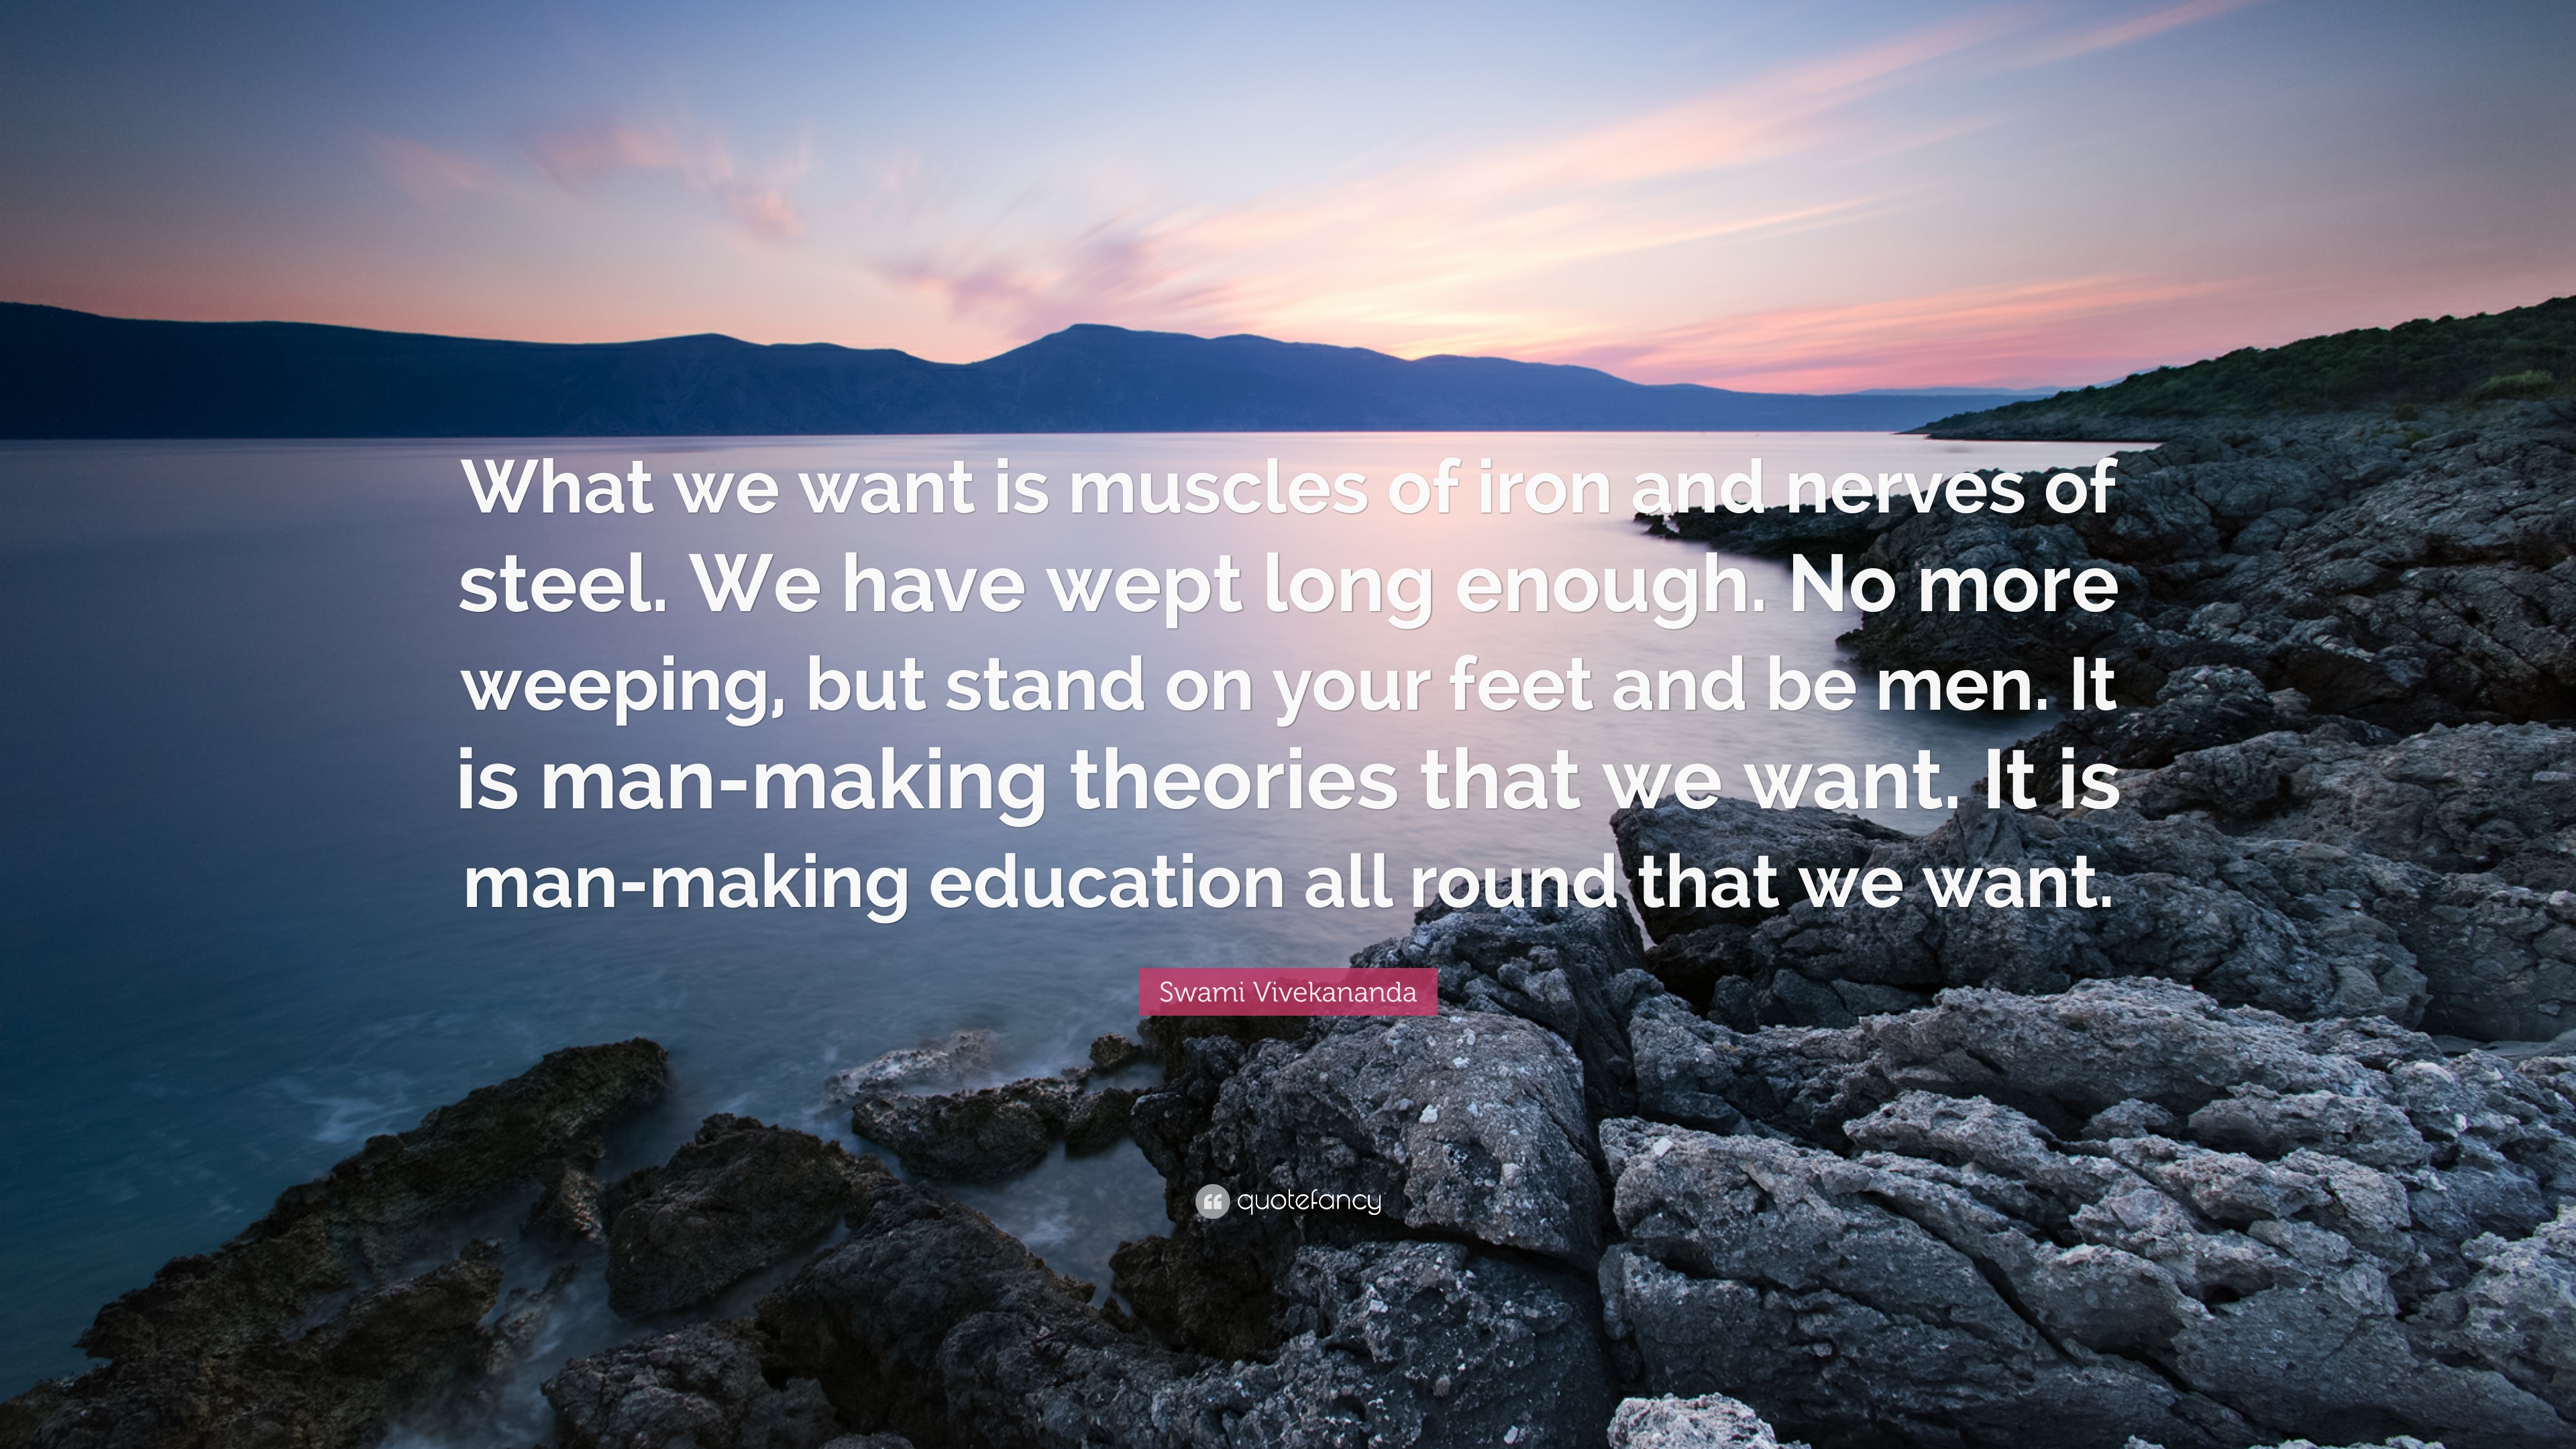 Swami Vivekananda Quote: “What we want is muscles of iron and nerves ...